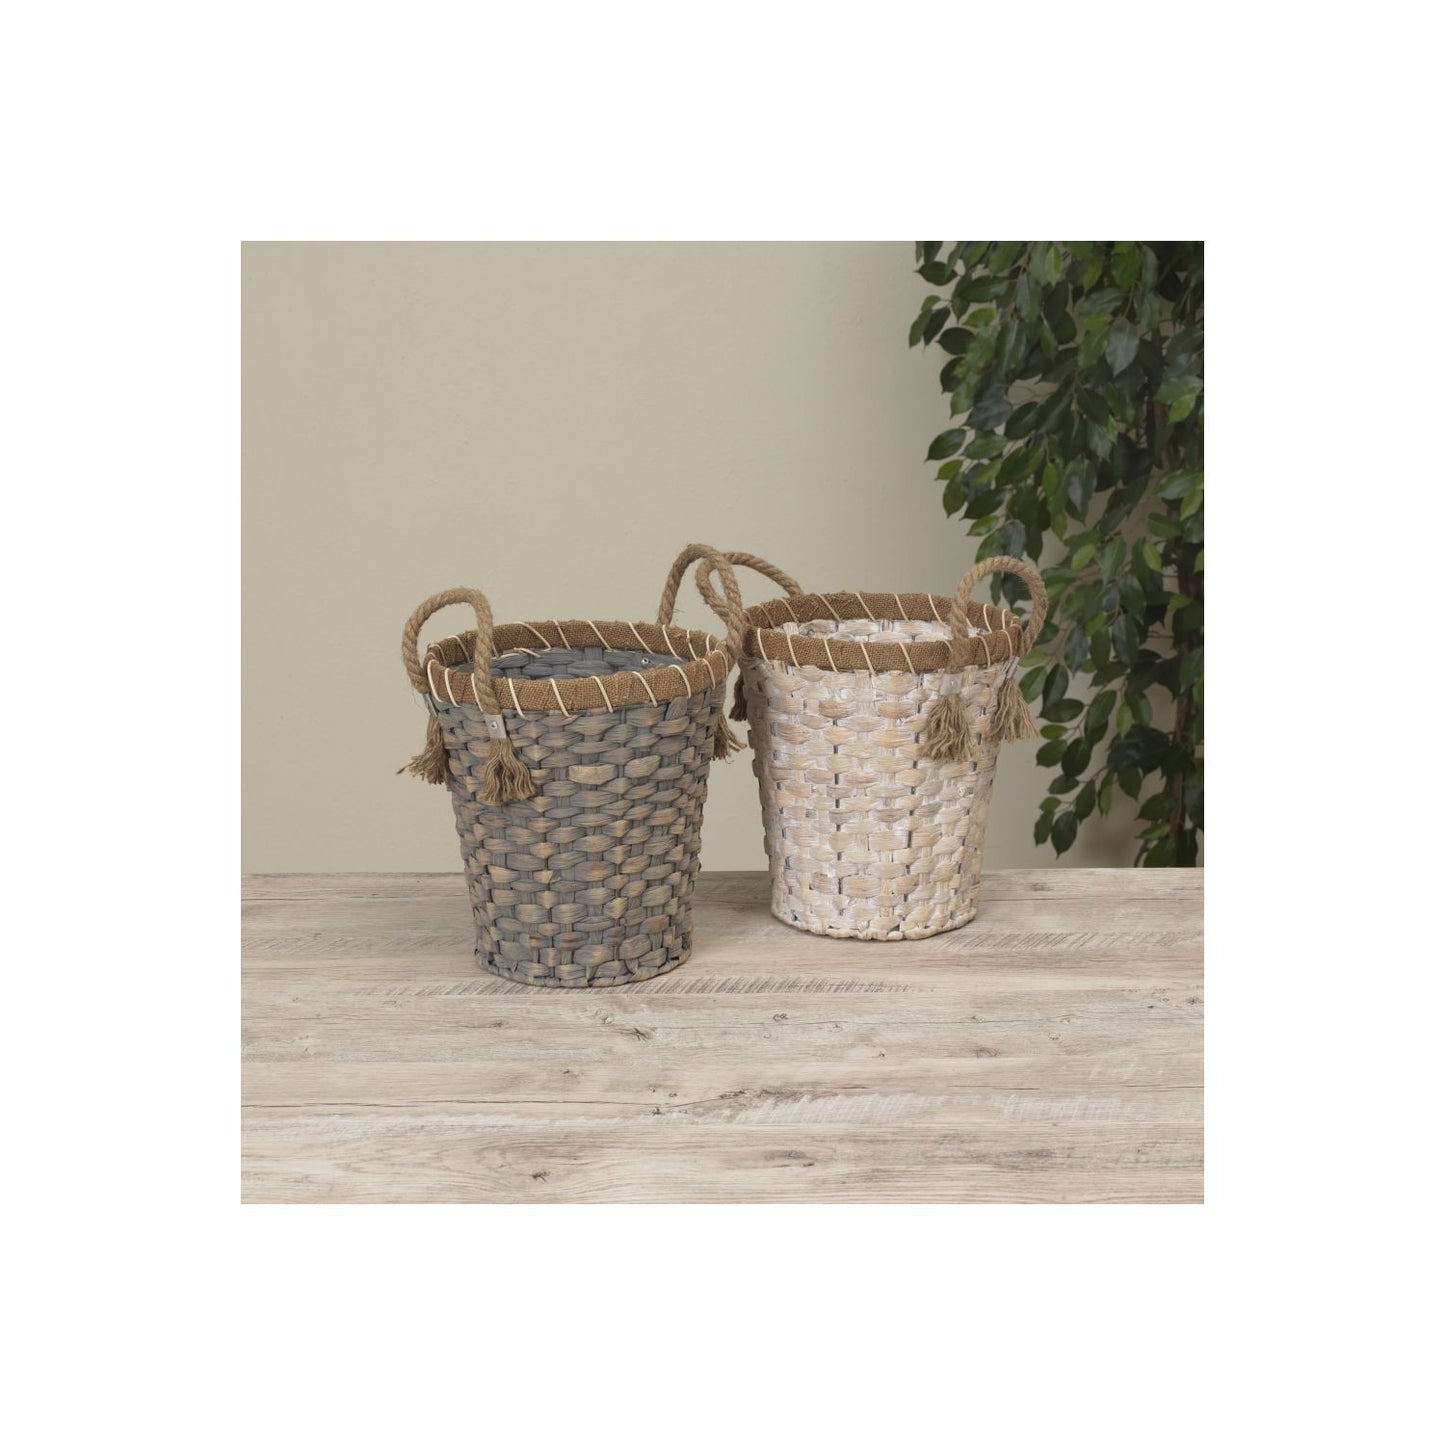 Gerson Company 11.25"H Straw Basket W/ Metal Frame & Rope Handles, 2 Assorted